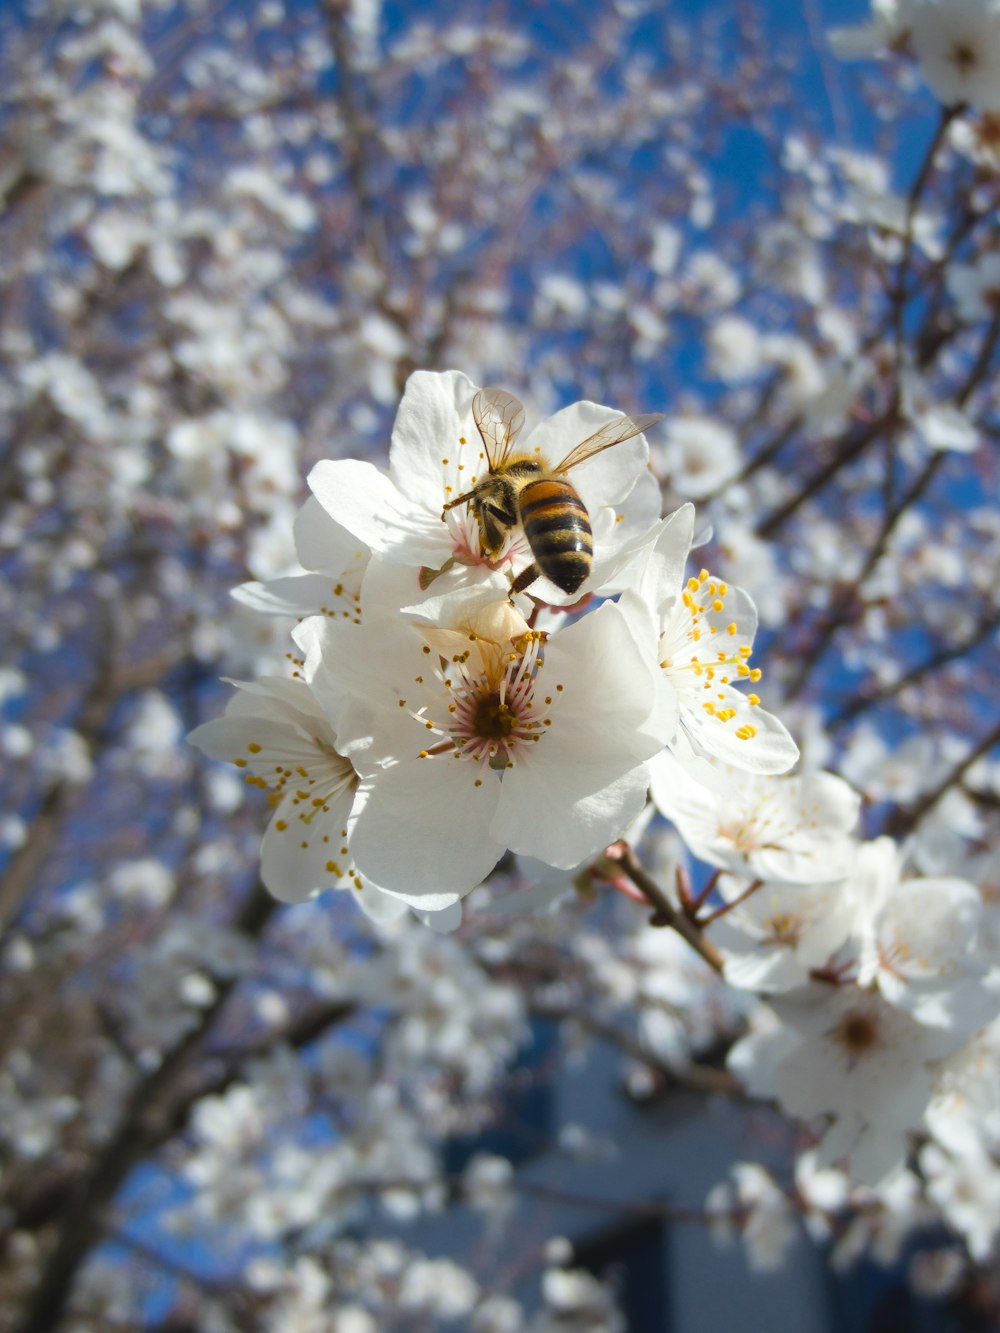 a bee is sitting on a white flower